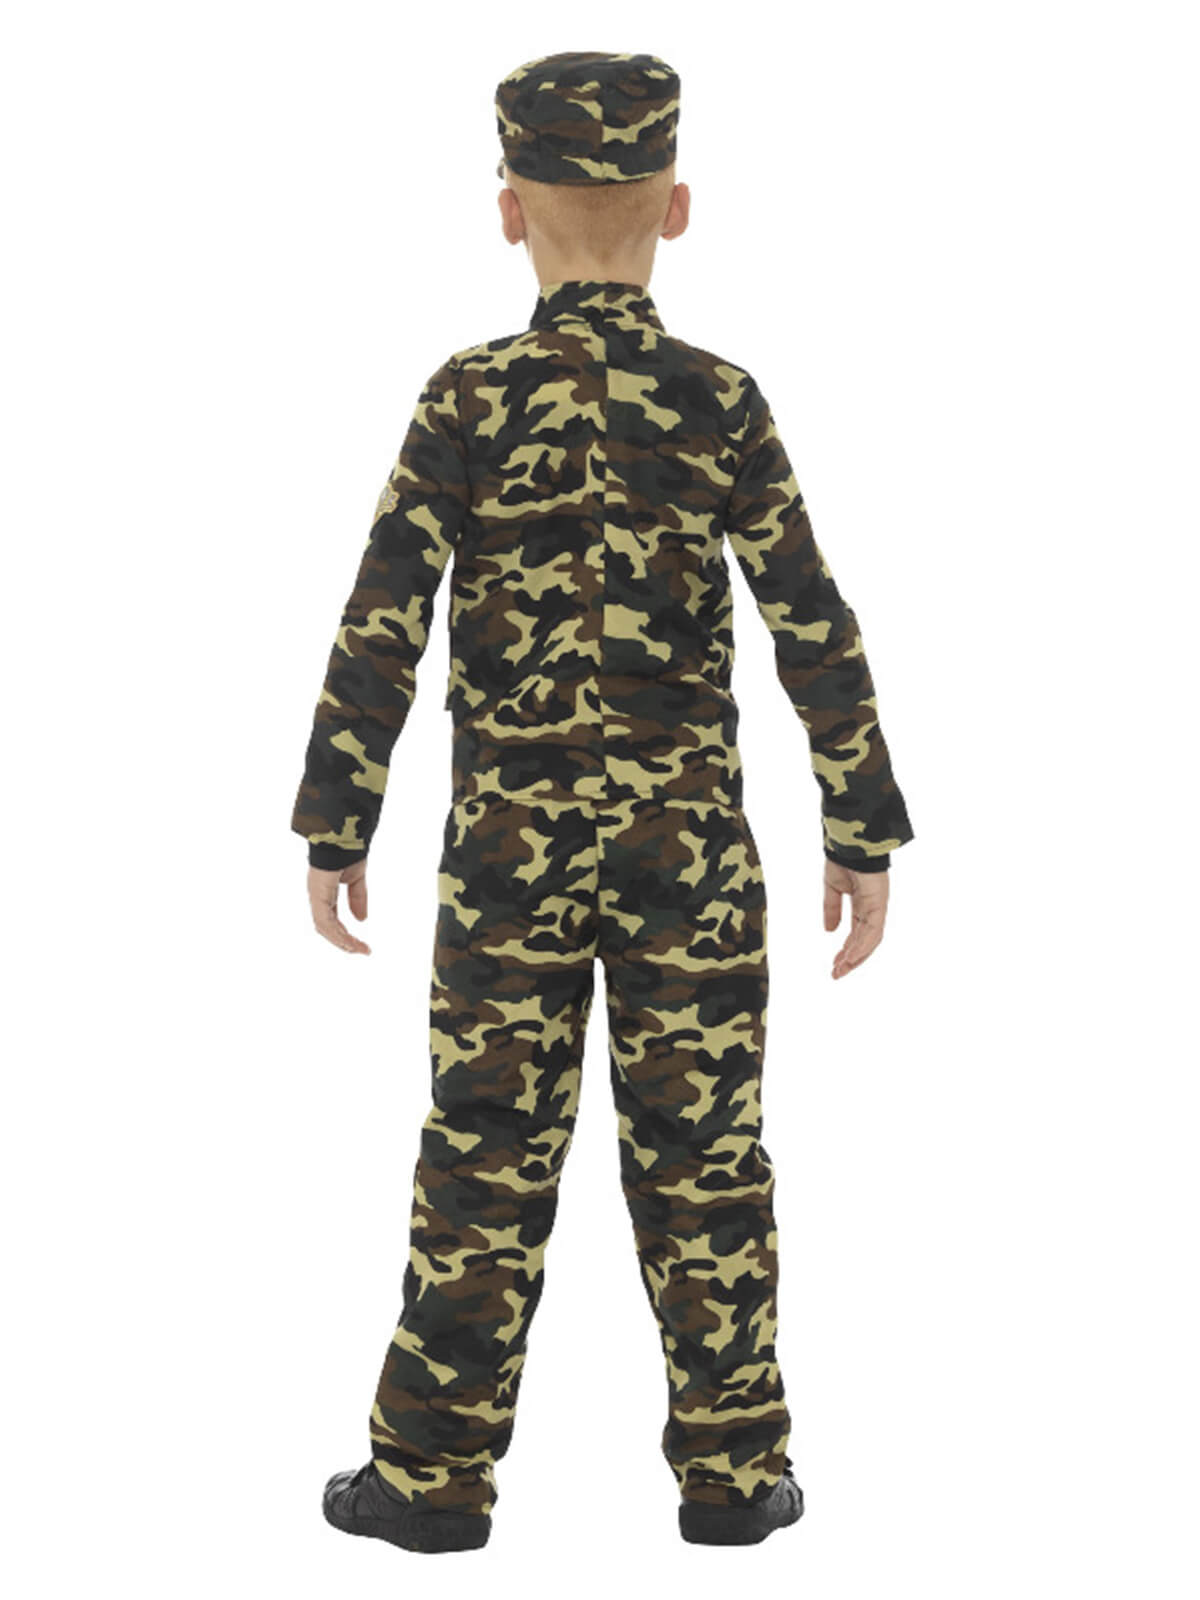 Camouflage Military Boy Costume, Green